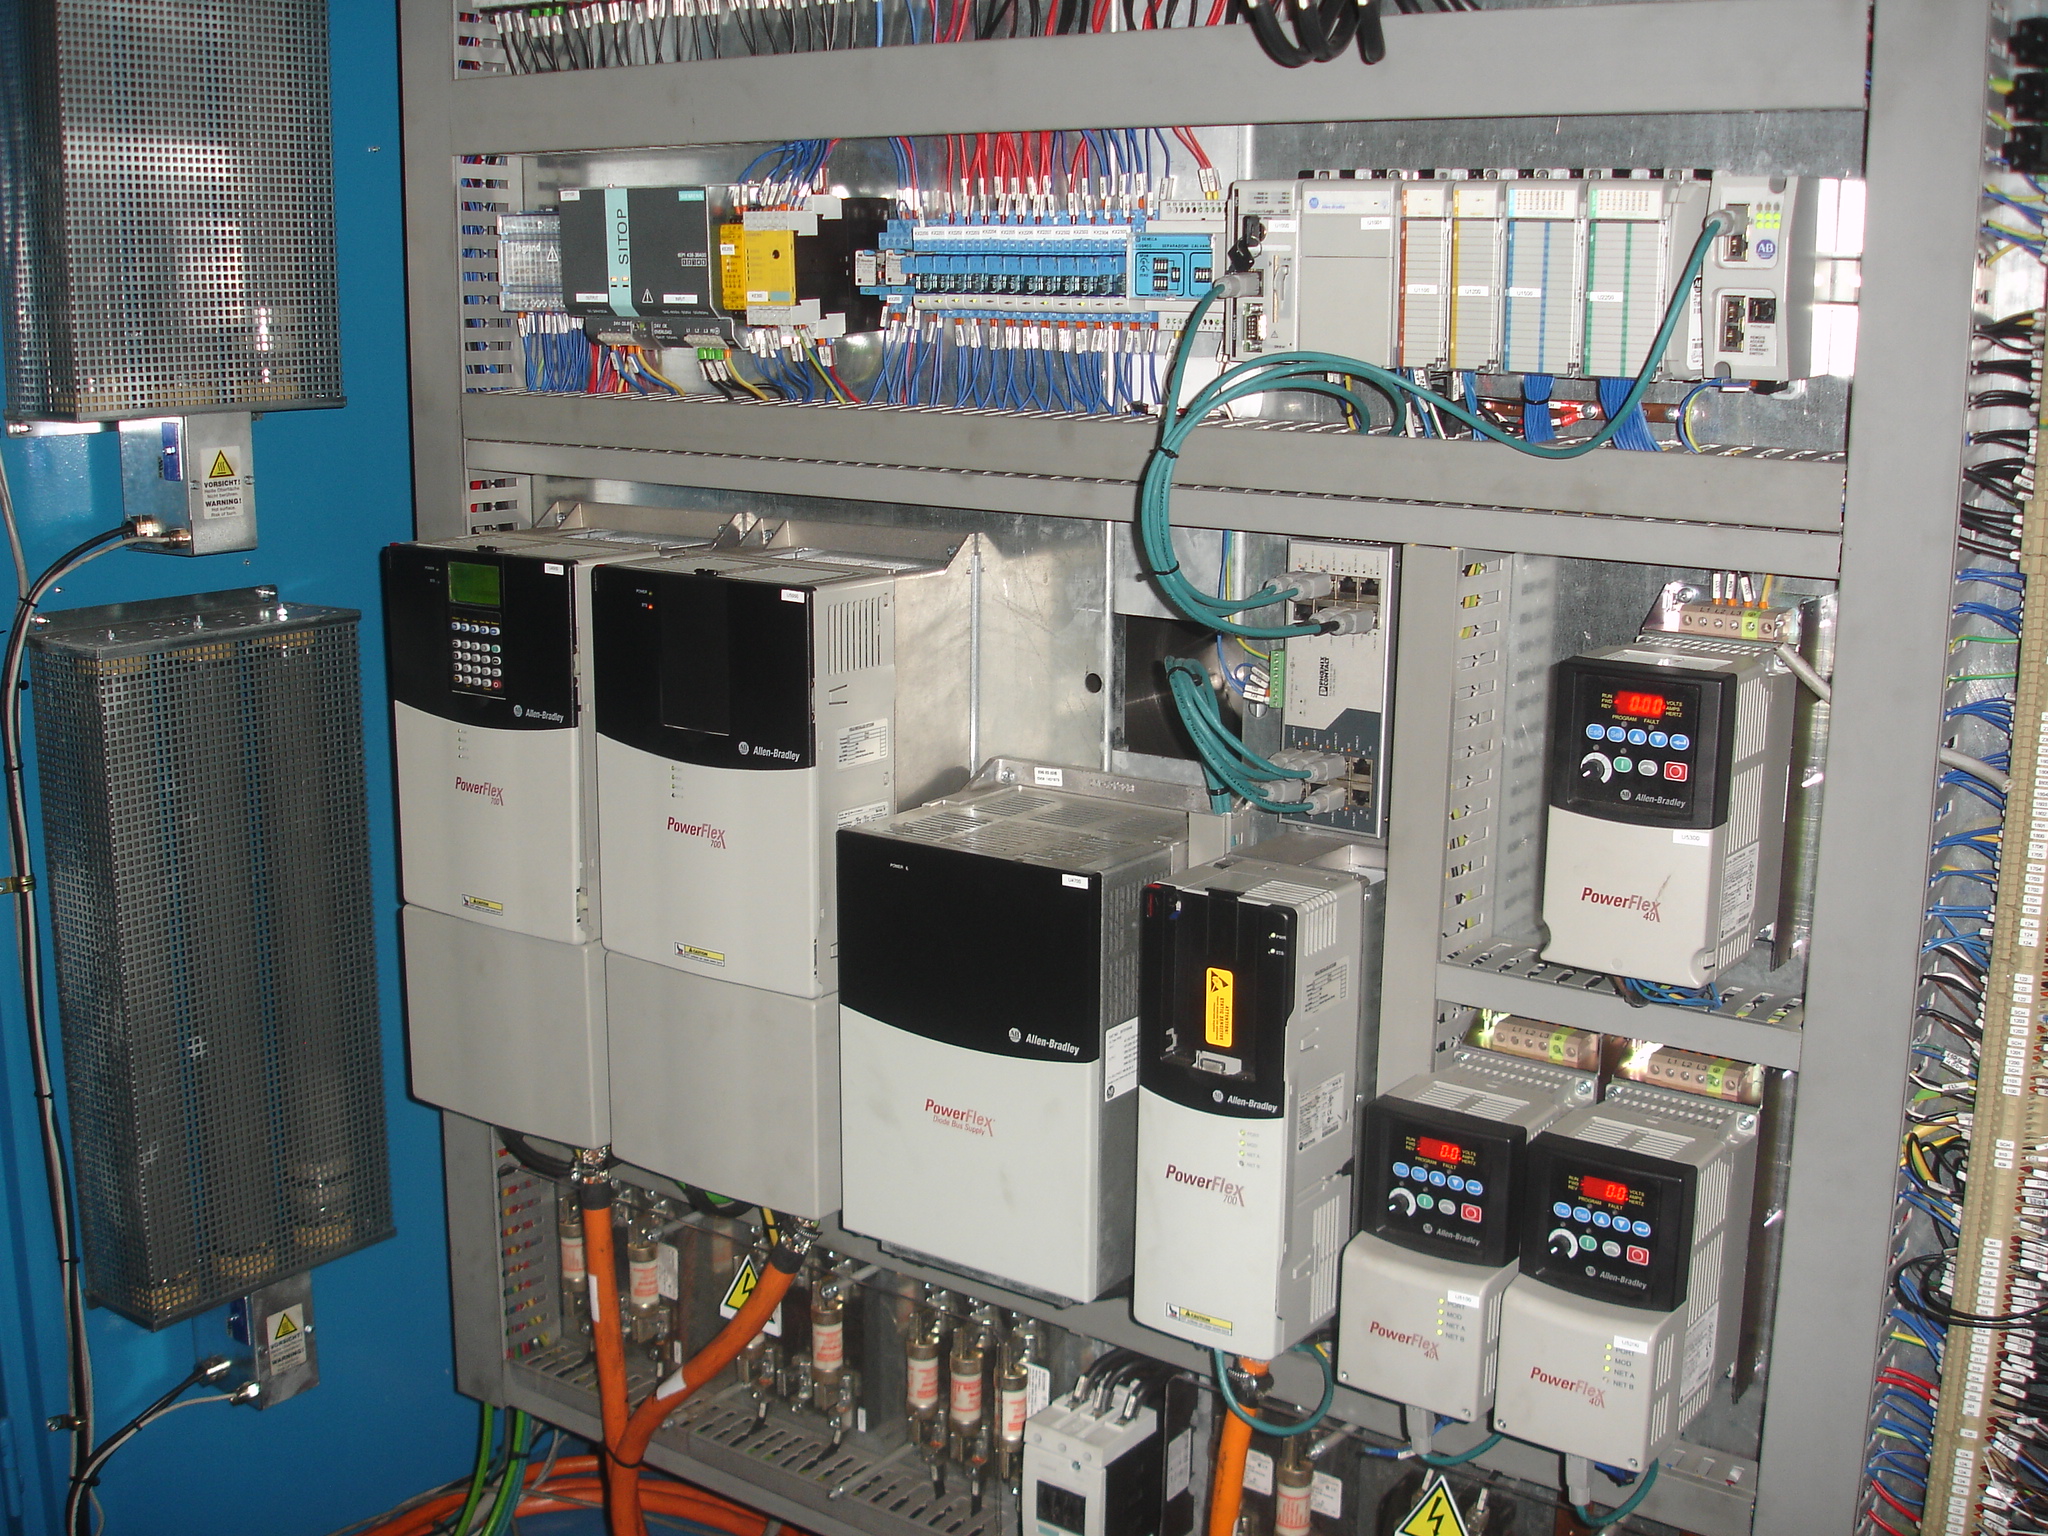 Electrical cabinets